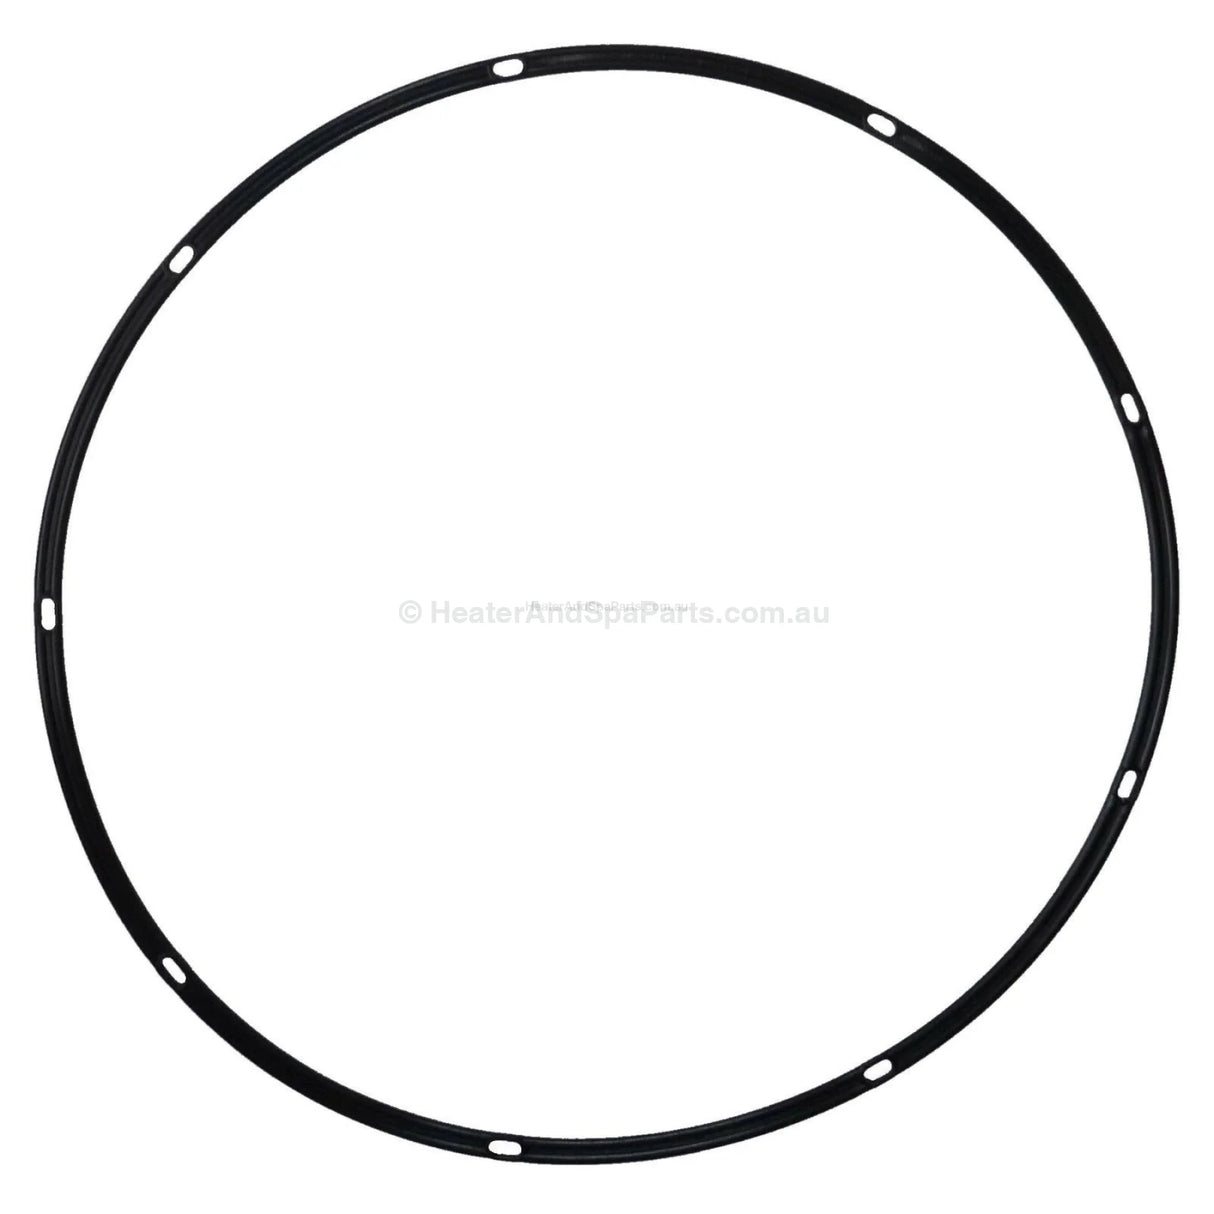 Pentair Mastertemp - Combustion Chamber Gasket - Bolt-Style - Heater and Spa Parts